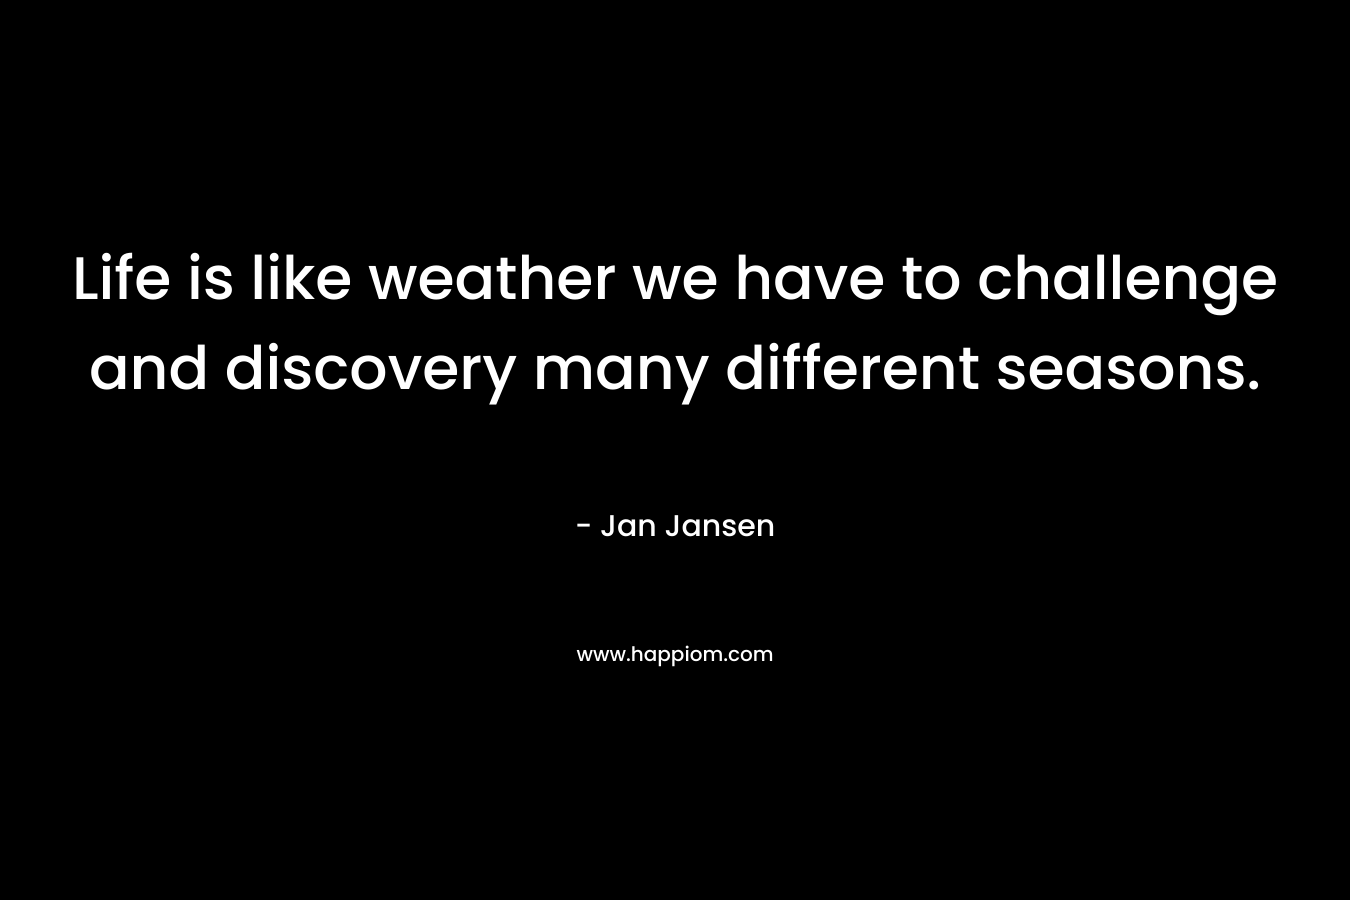 Life is like weather we have to challenge and discovery many different seasons. – Jan Jansen